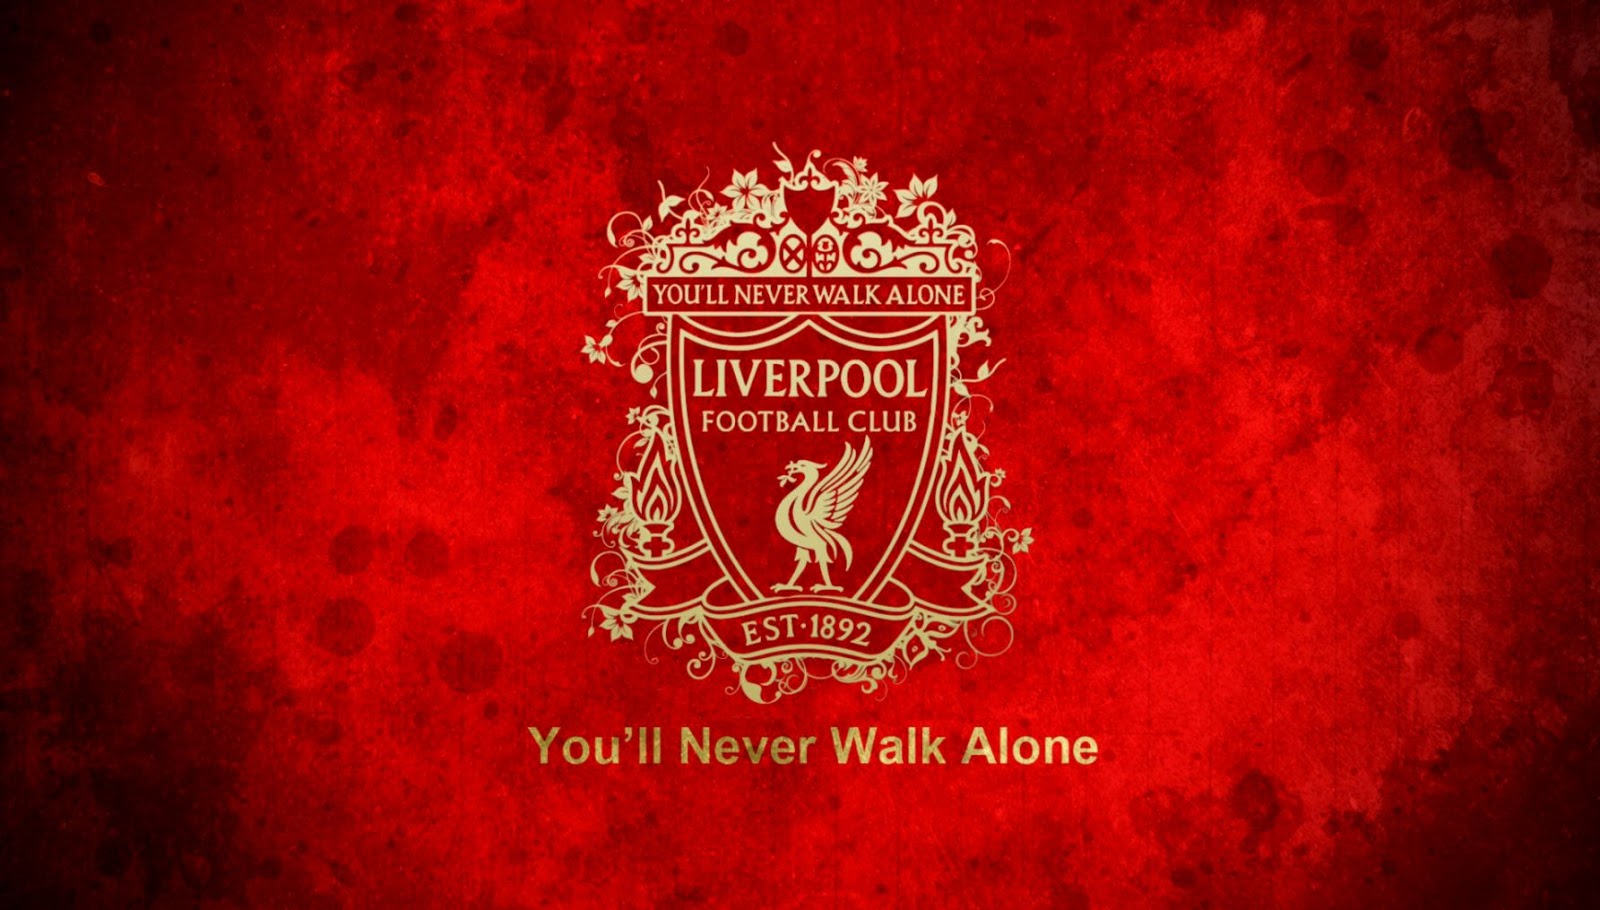 Featured image of post Liverpool Fc Players Wallpaper Hd 2020 - See more liverpool soccer wallpaper, liverpool wallpaper, liverpool football club wallpaper, liverpool goal wallpaper, liverpool players wallpaper, wallpaper liverpool shirt.